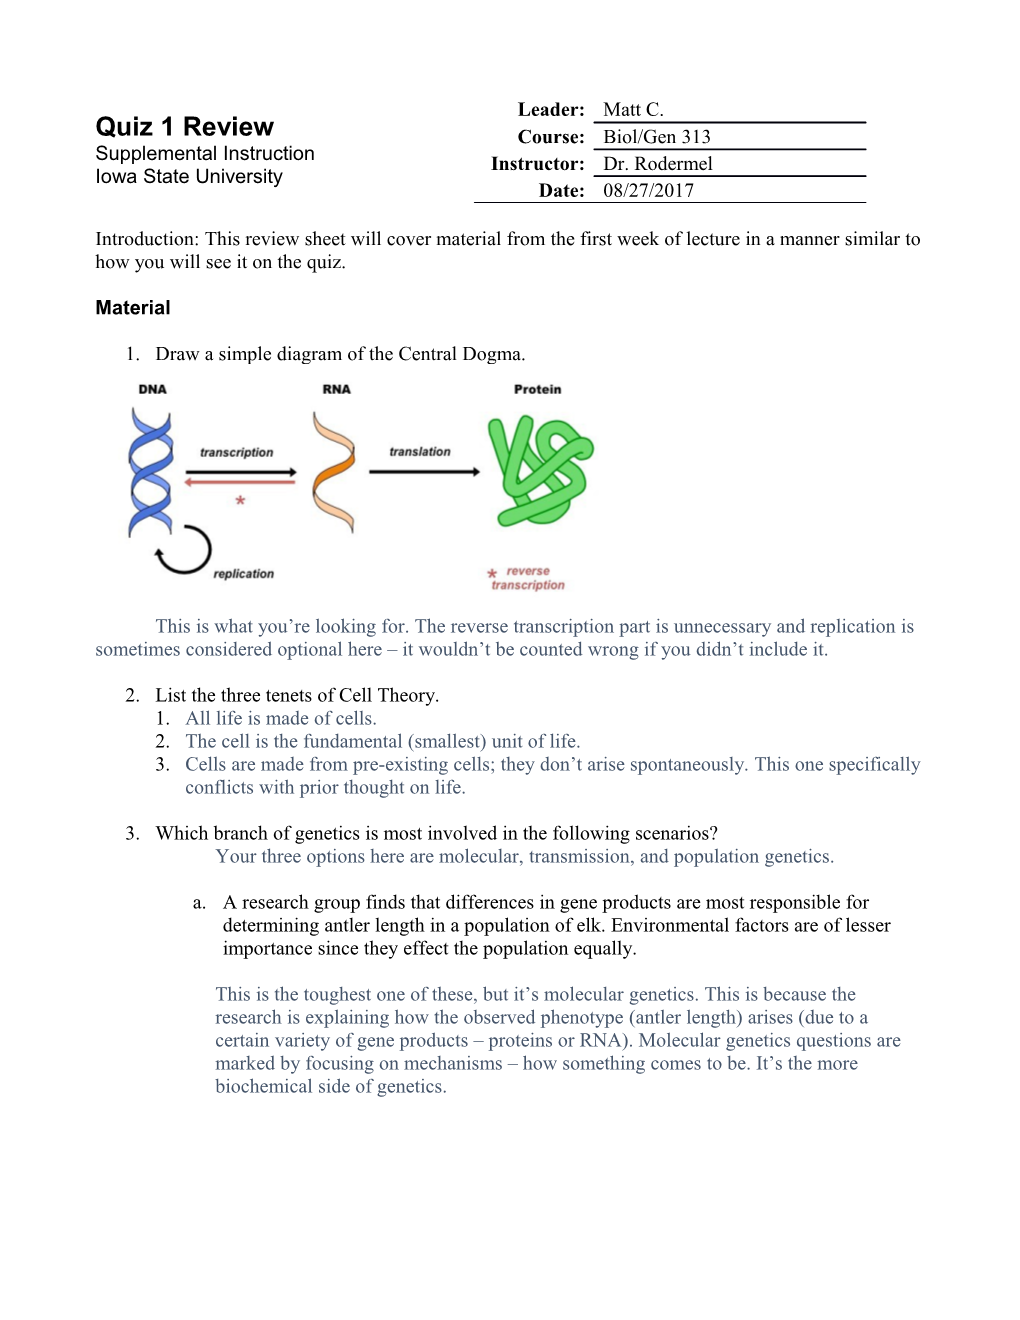 Introduction: This Review Sheet Will Cover Material from the First Week of Lecture in A